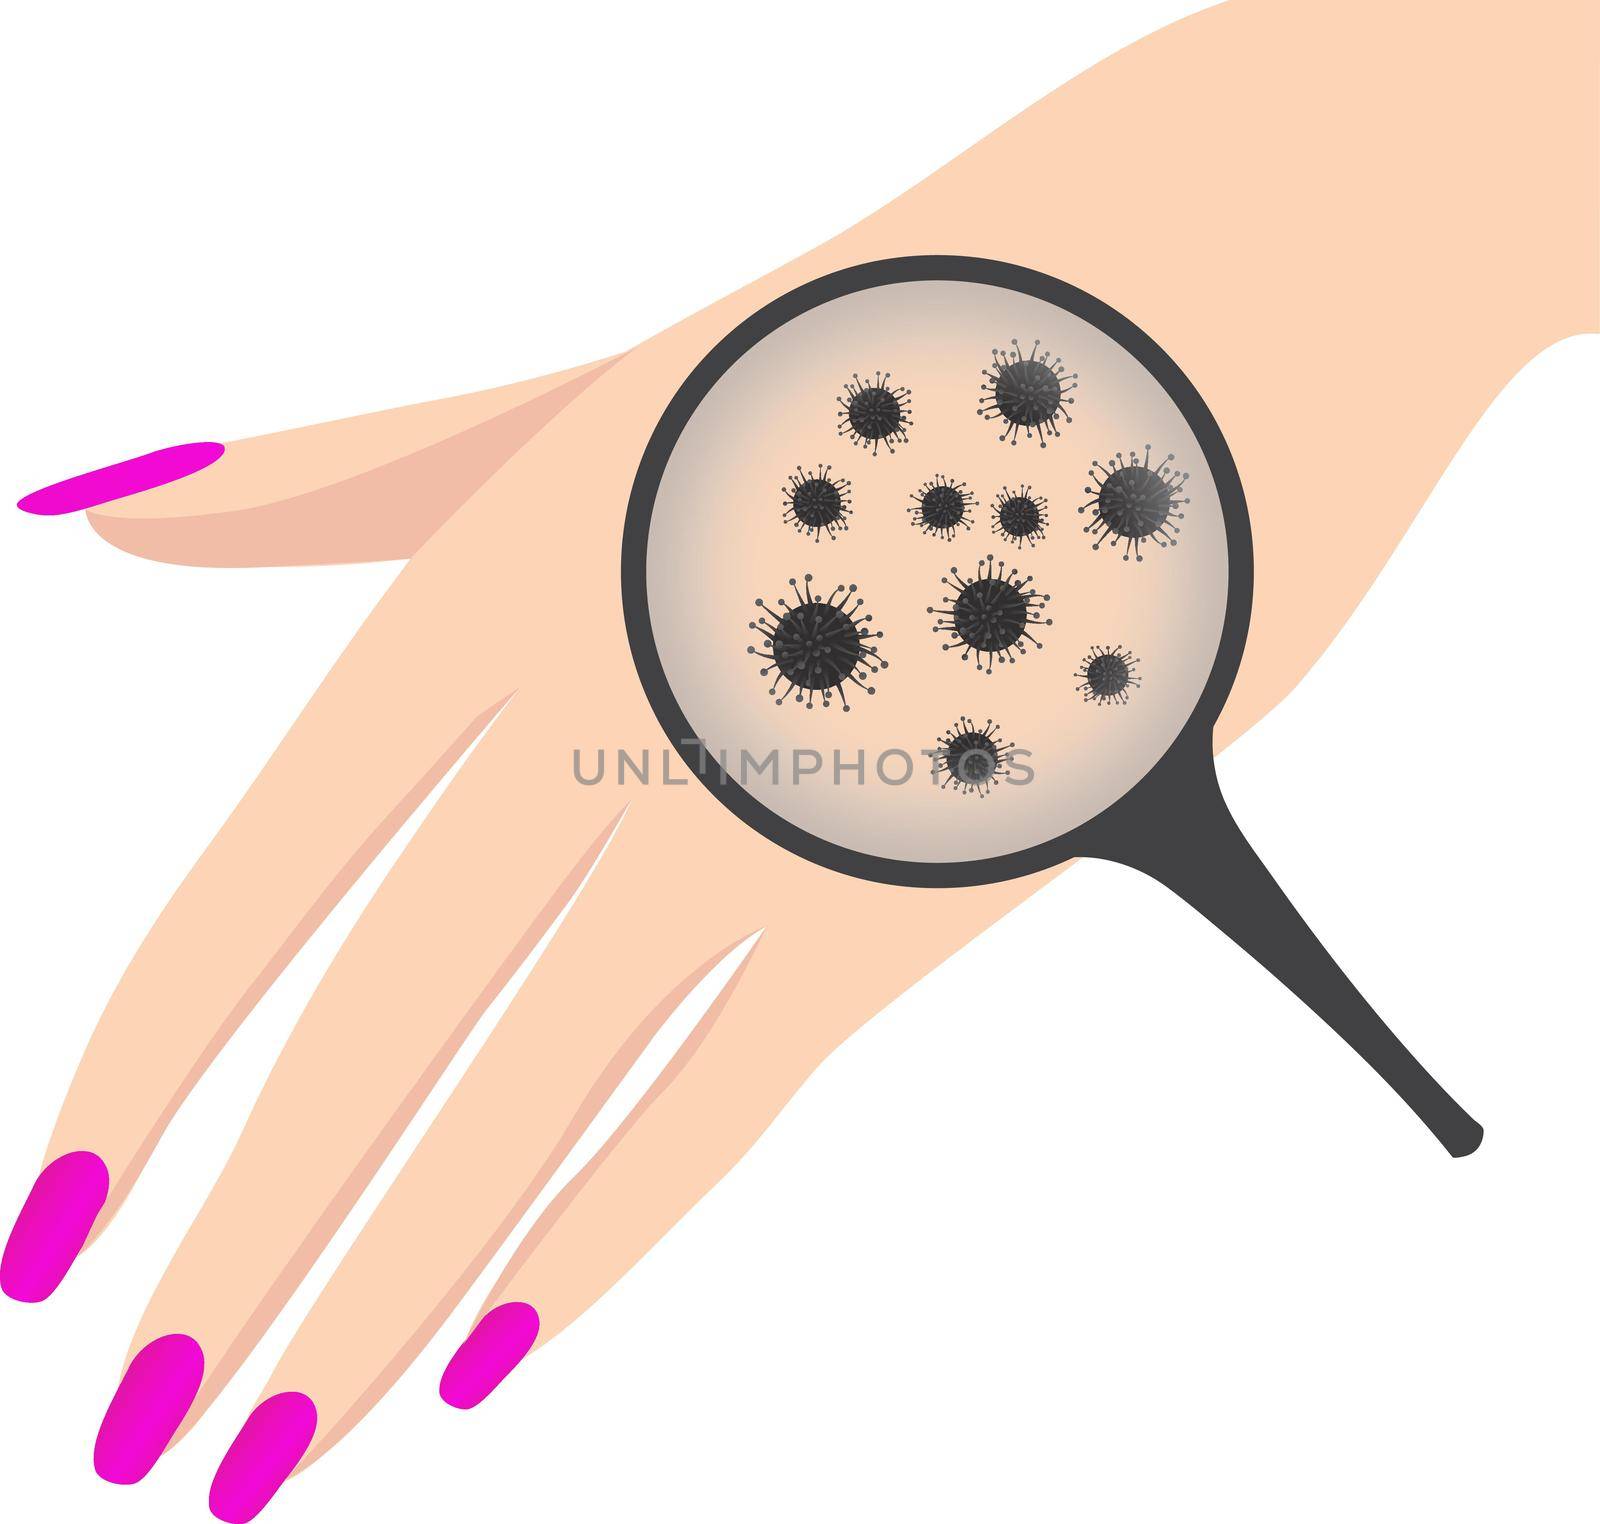 corona virus infection on hands vector illustration by Olena758